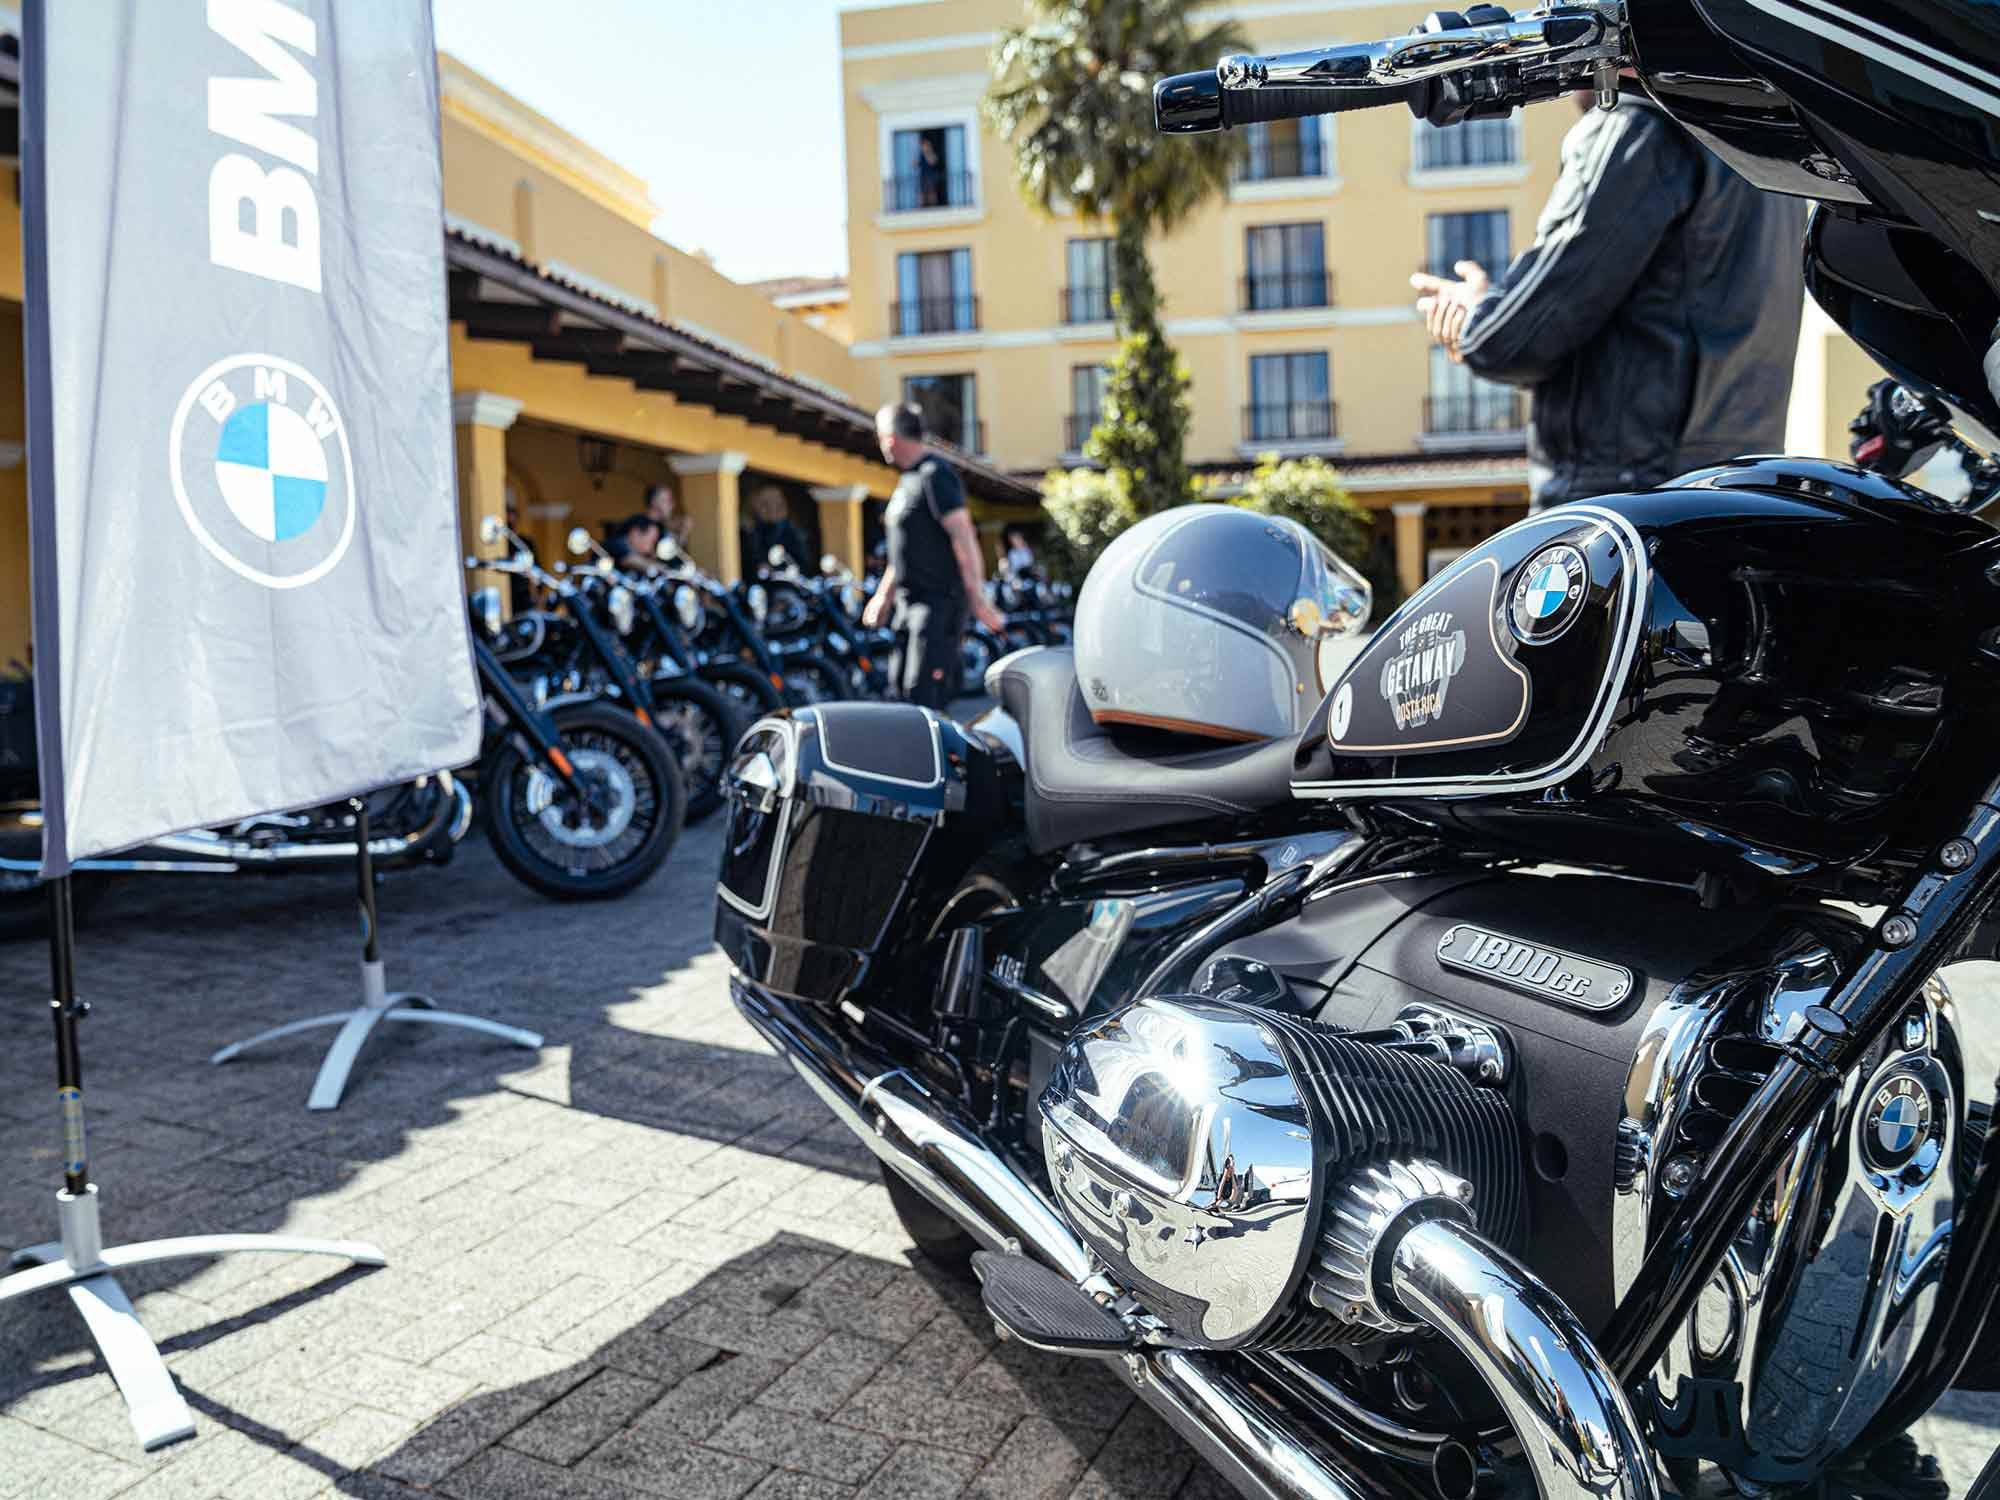 We participate in BMW Motorrad’s The Great Getaway R 18 cruiser motorcycle tour in Costa Rica.